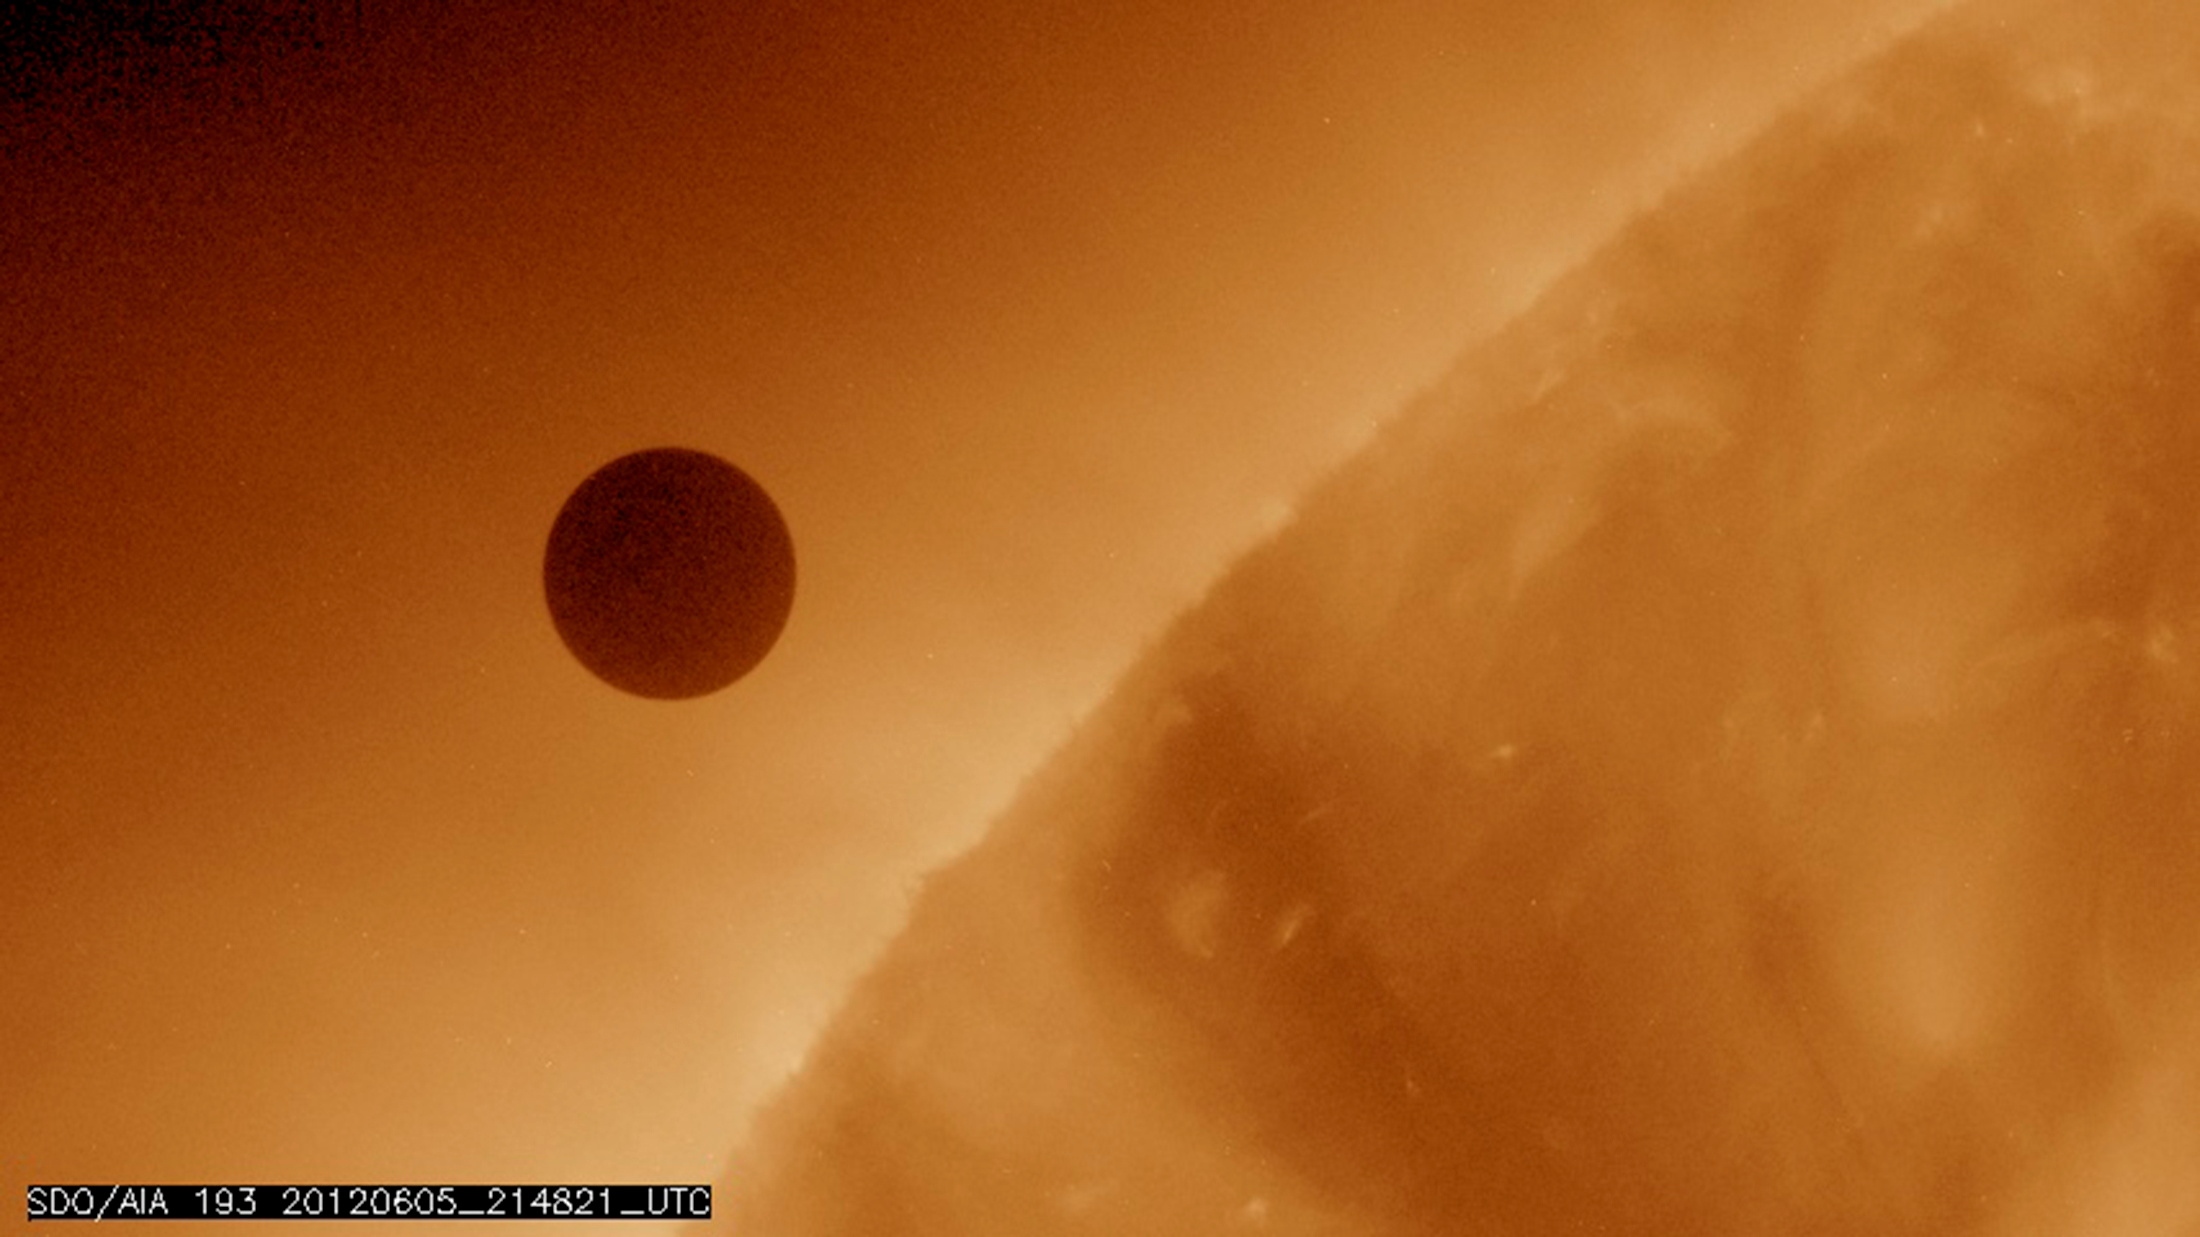 NASA image shows the planet Venus at the start of its transit of the Sun